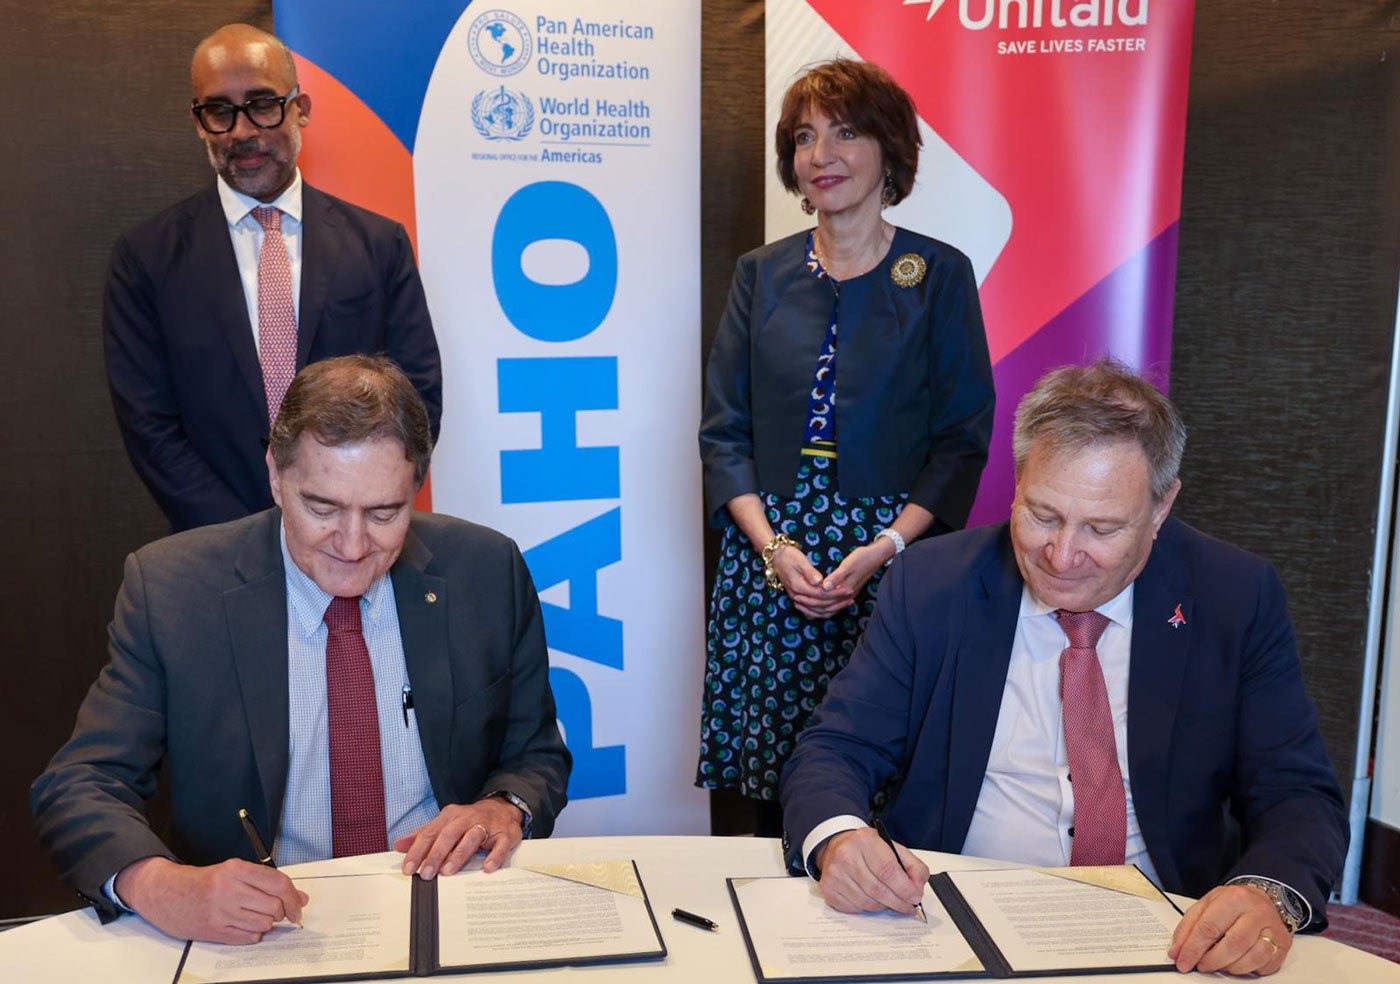 PAHO and Unitaid signed agreement that includes includes, among others the mobilization of partners and resources to scale up access to global health innovations and affordable and quality-assured health commodities, as well as to support the local manufacturing of health technologies.